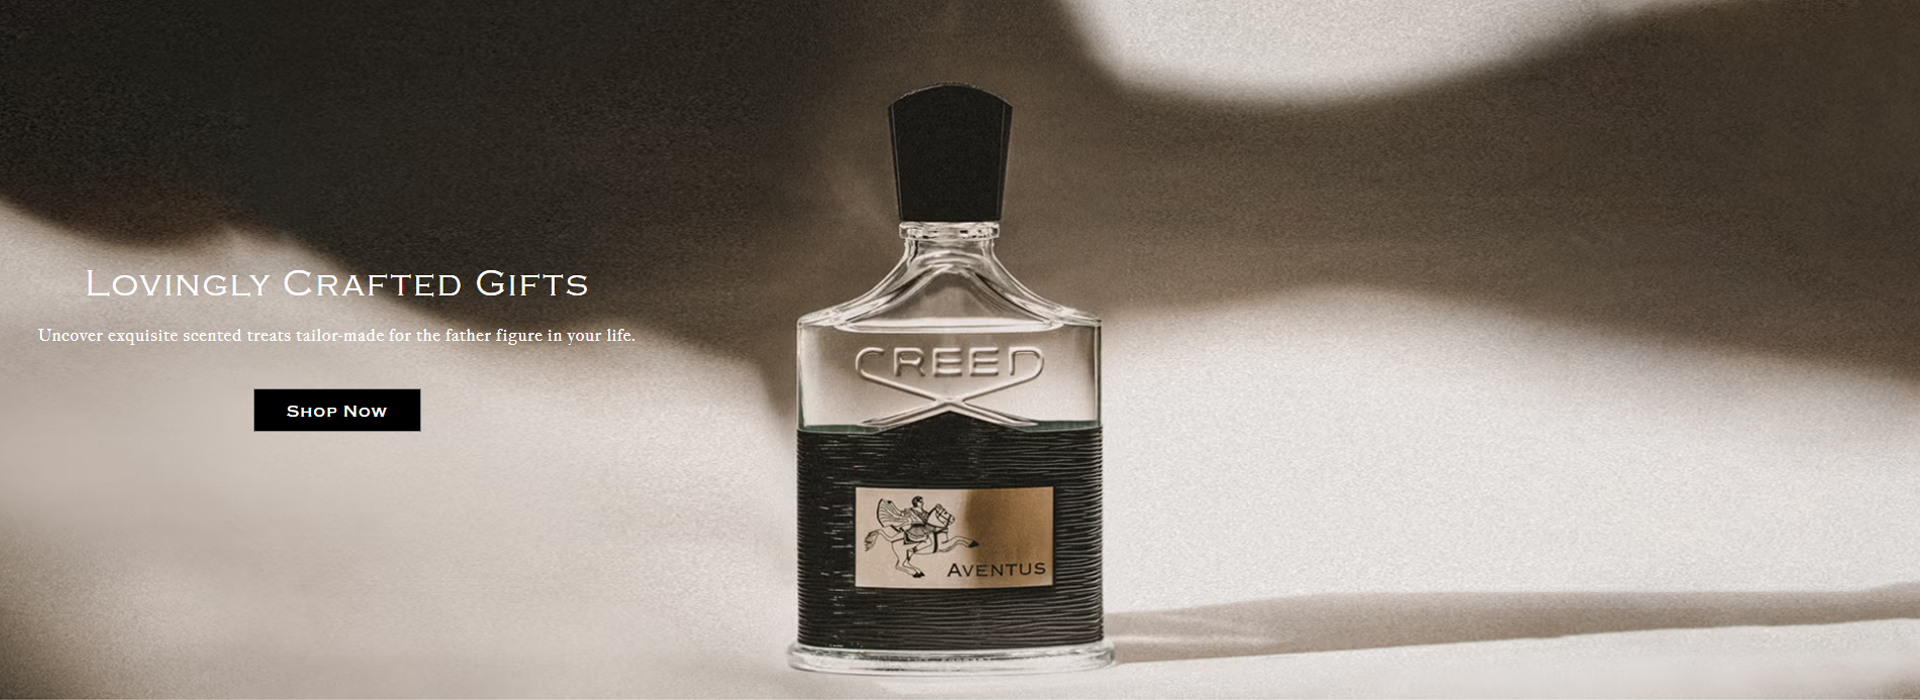 Creed banner